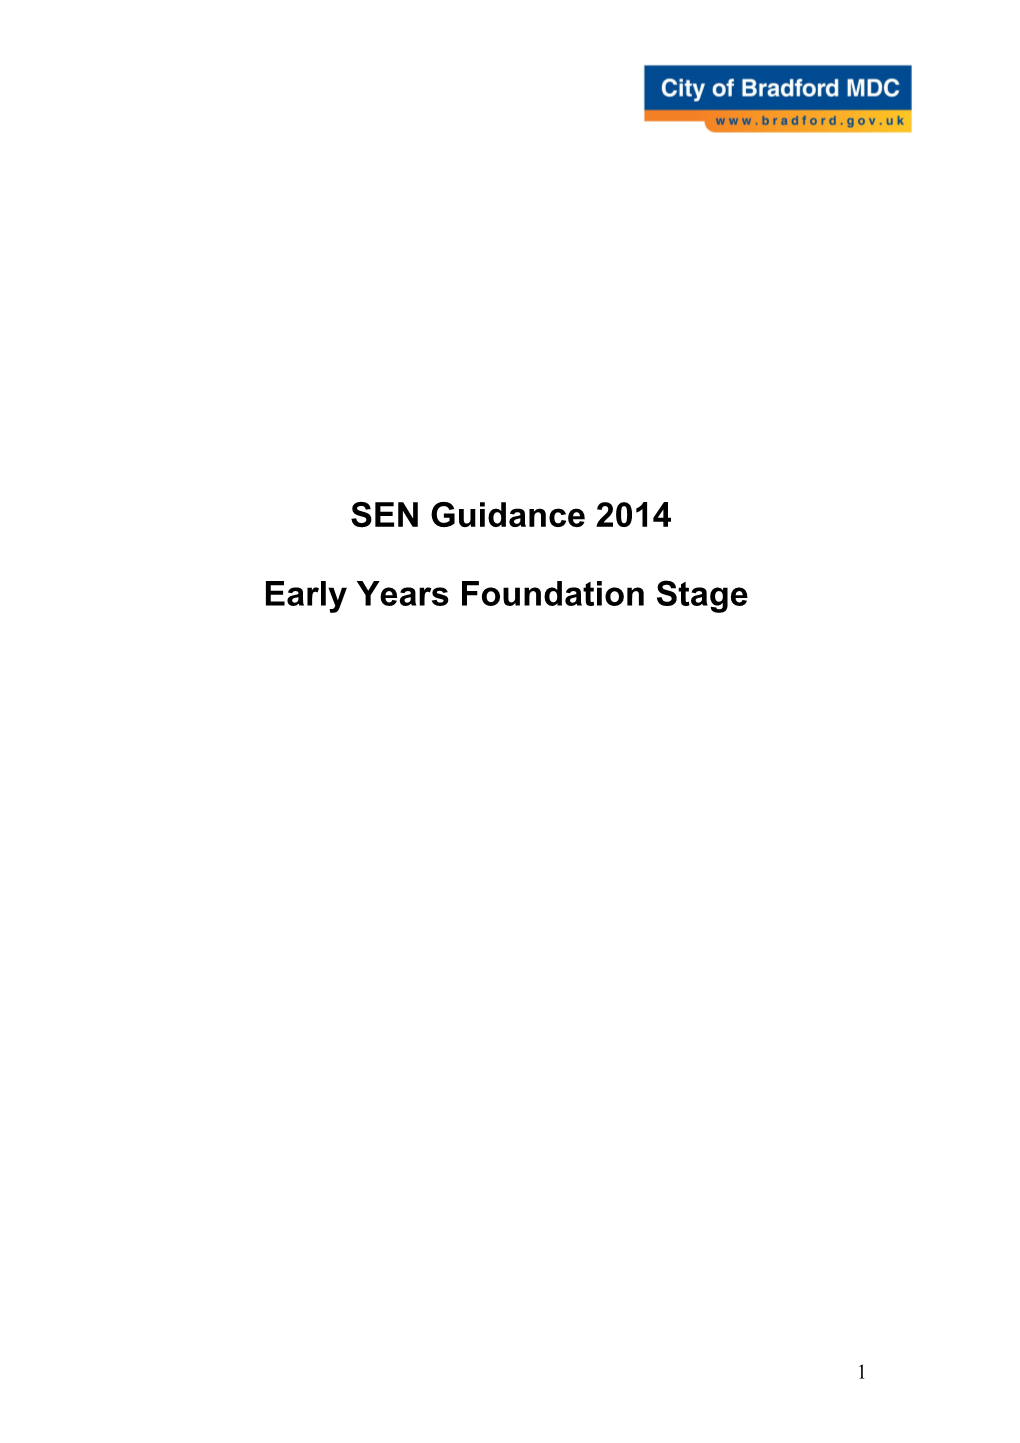 Guidance for Children with SEN in the Early Years